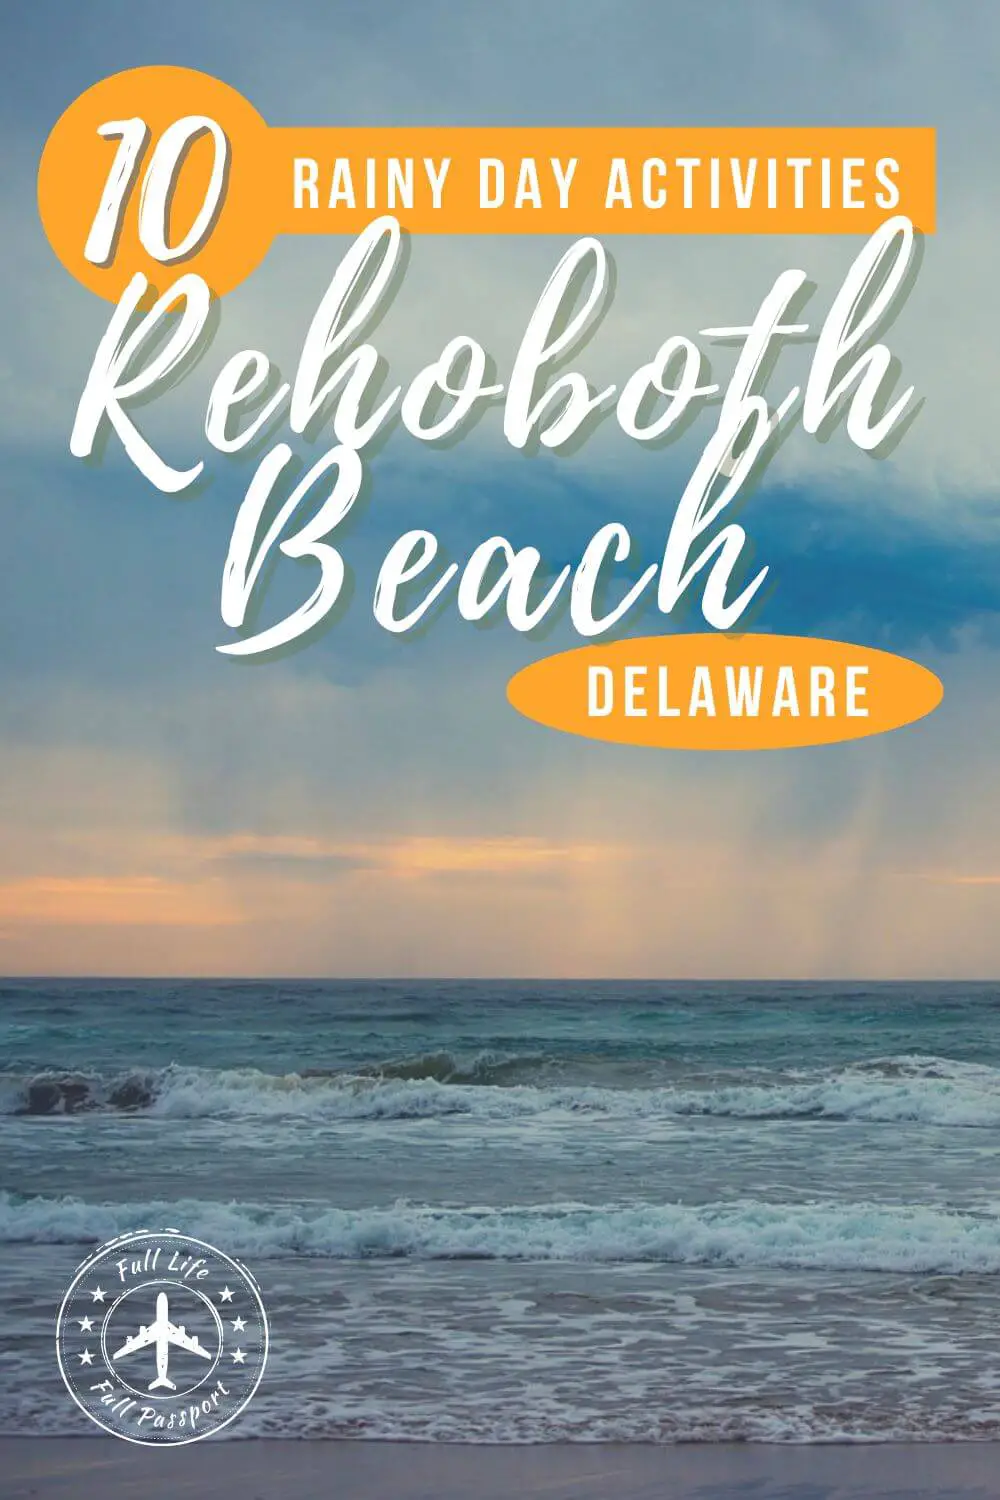 10 Things to Do on a Rainy Day in Rehoboth Beach